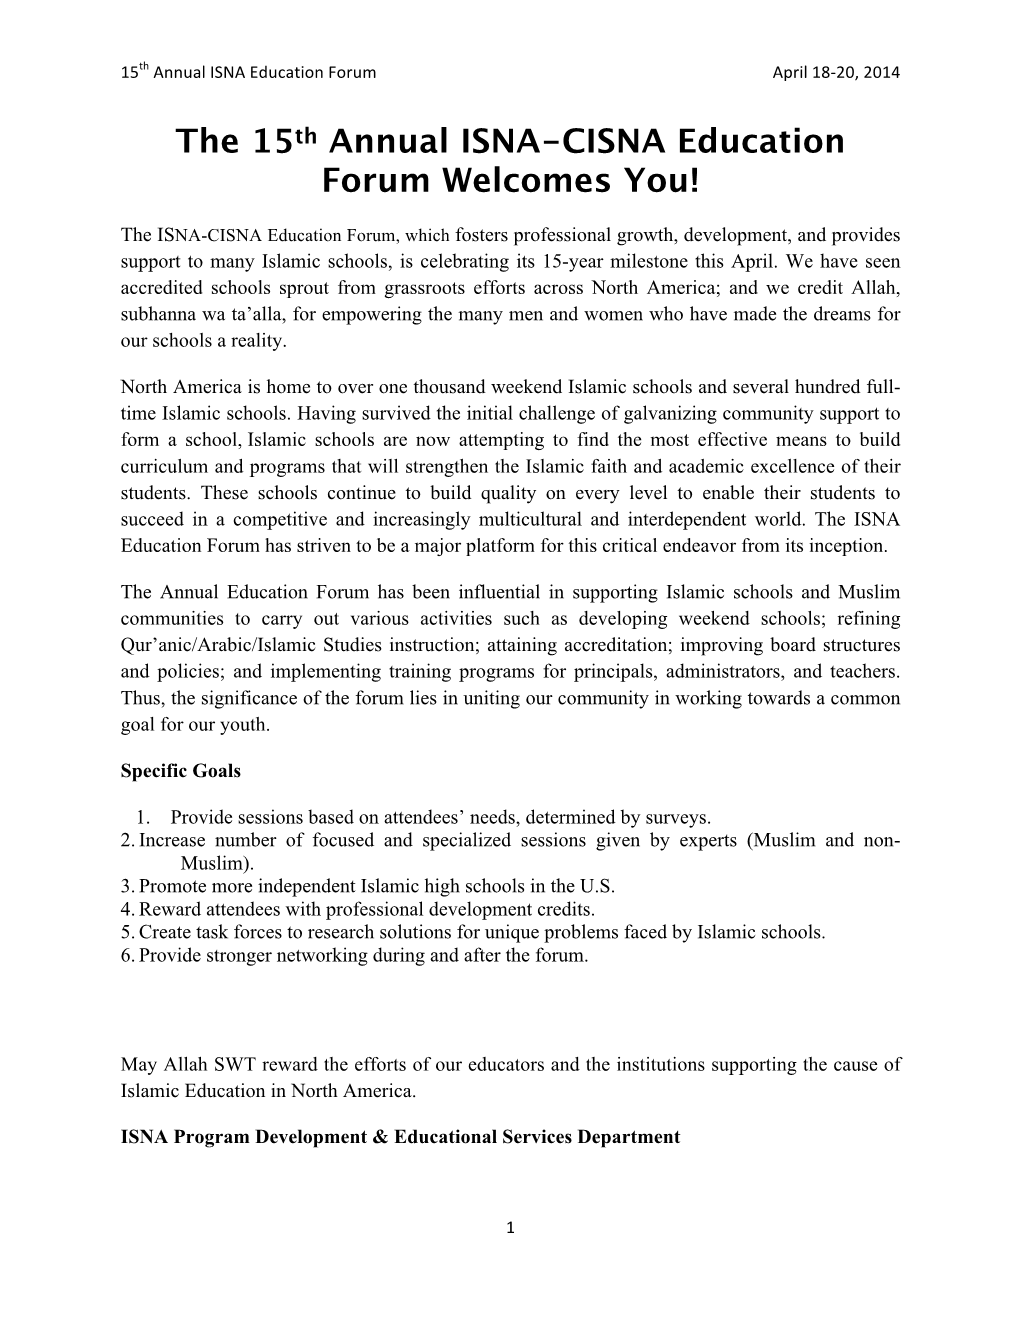 The 15Th Annual ISNA-CISNA Education Forum Welcomes You!